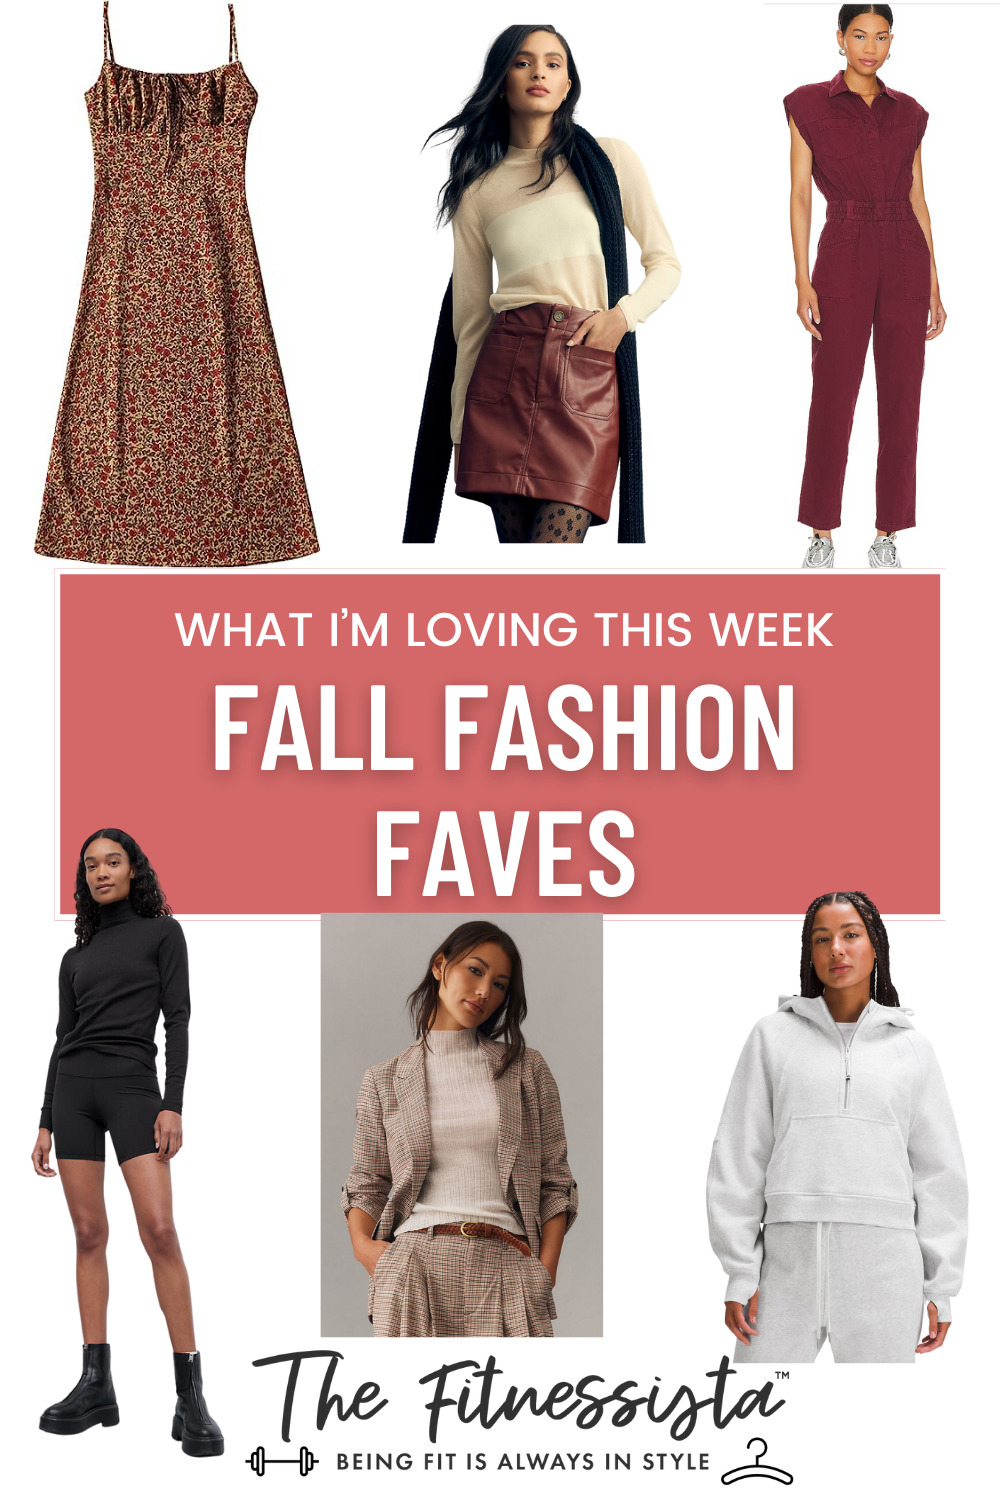 This week's fashion faves 9.28 - The Fitnessista